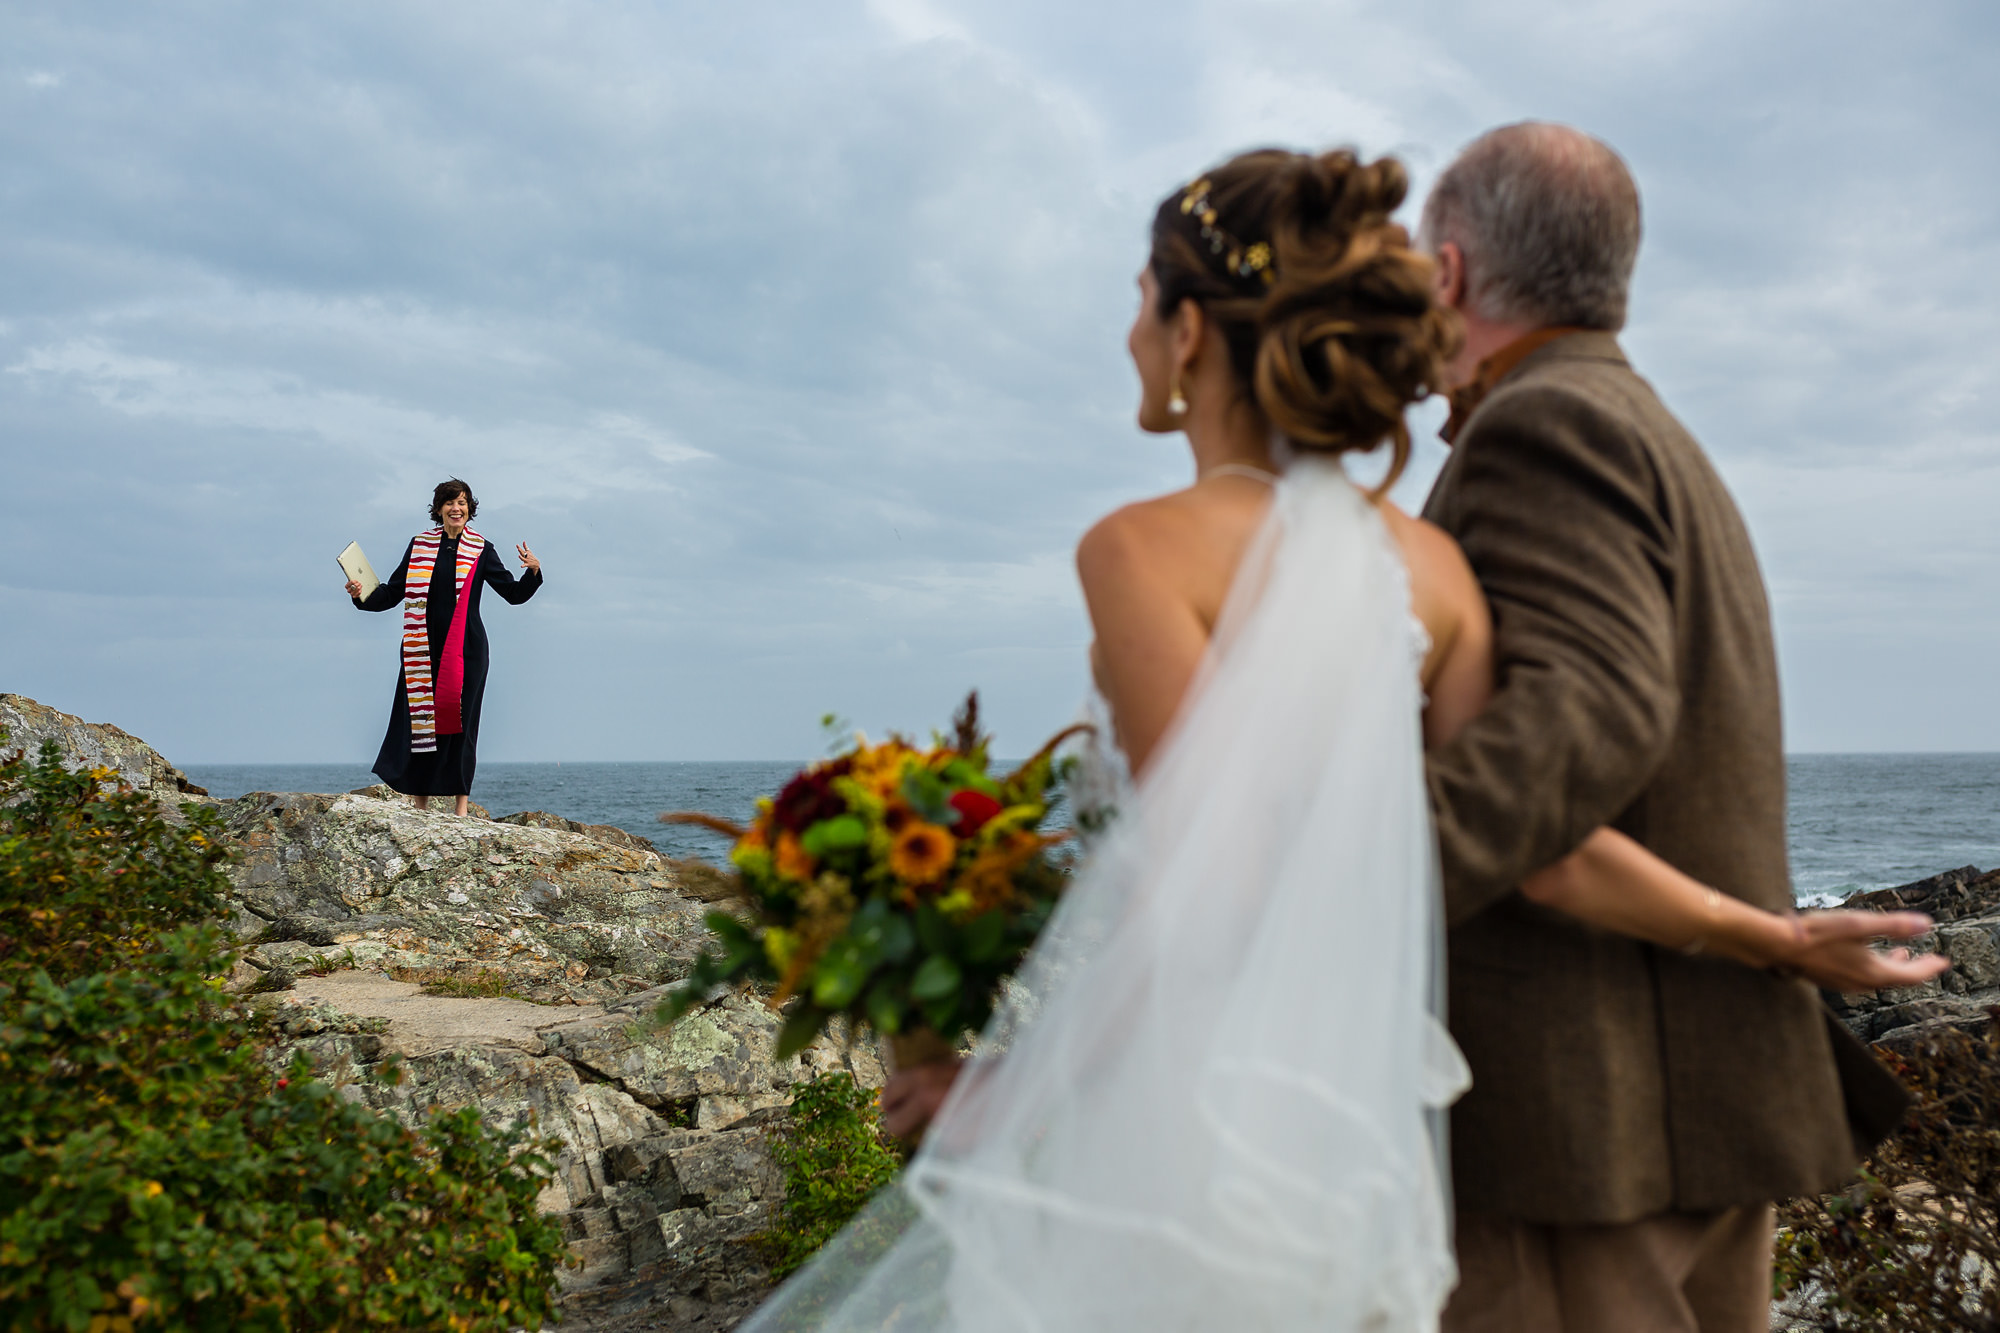 Jamey and Tom eloped at the picturesque Marginal Way in Ogunquit, Maine